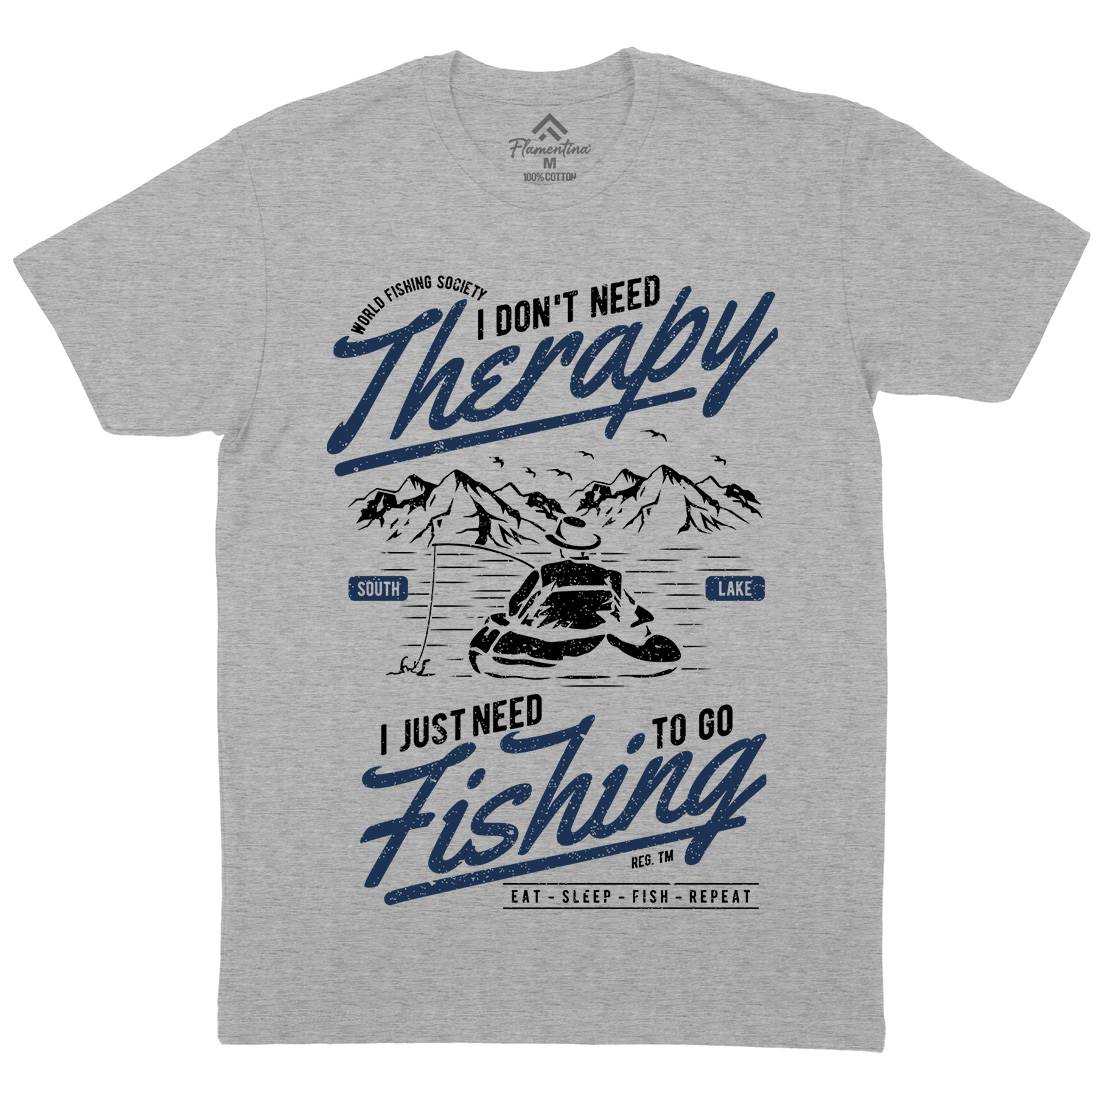 Therapy Mens Crew Neck T-Shirt Fishing A662